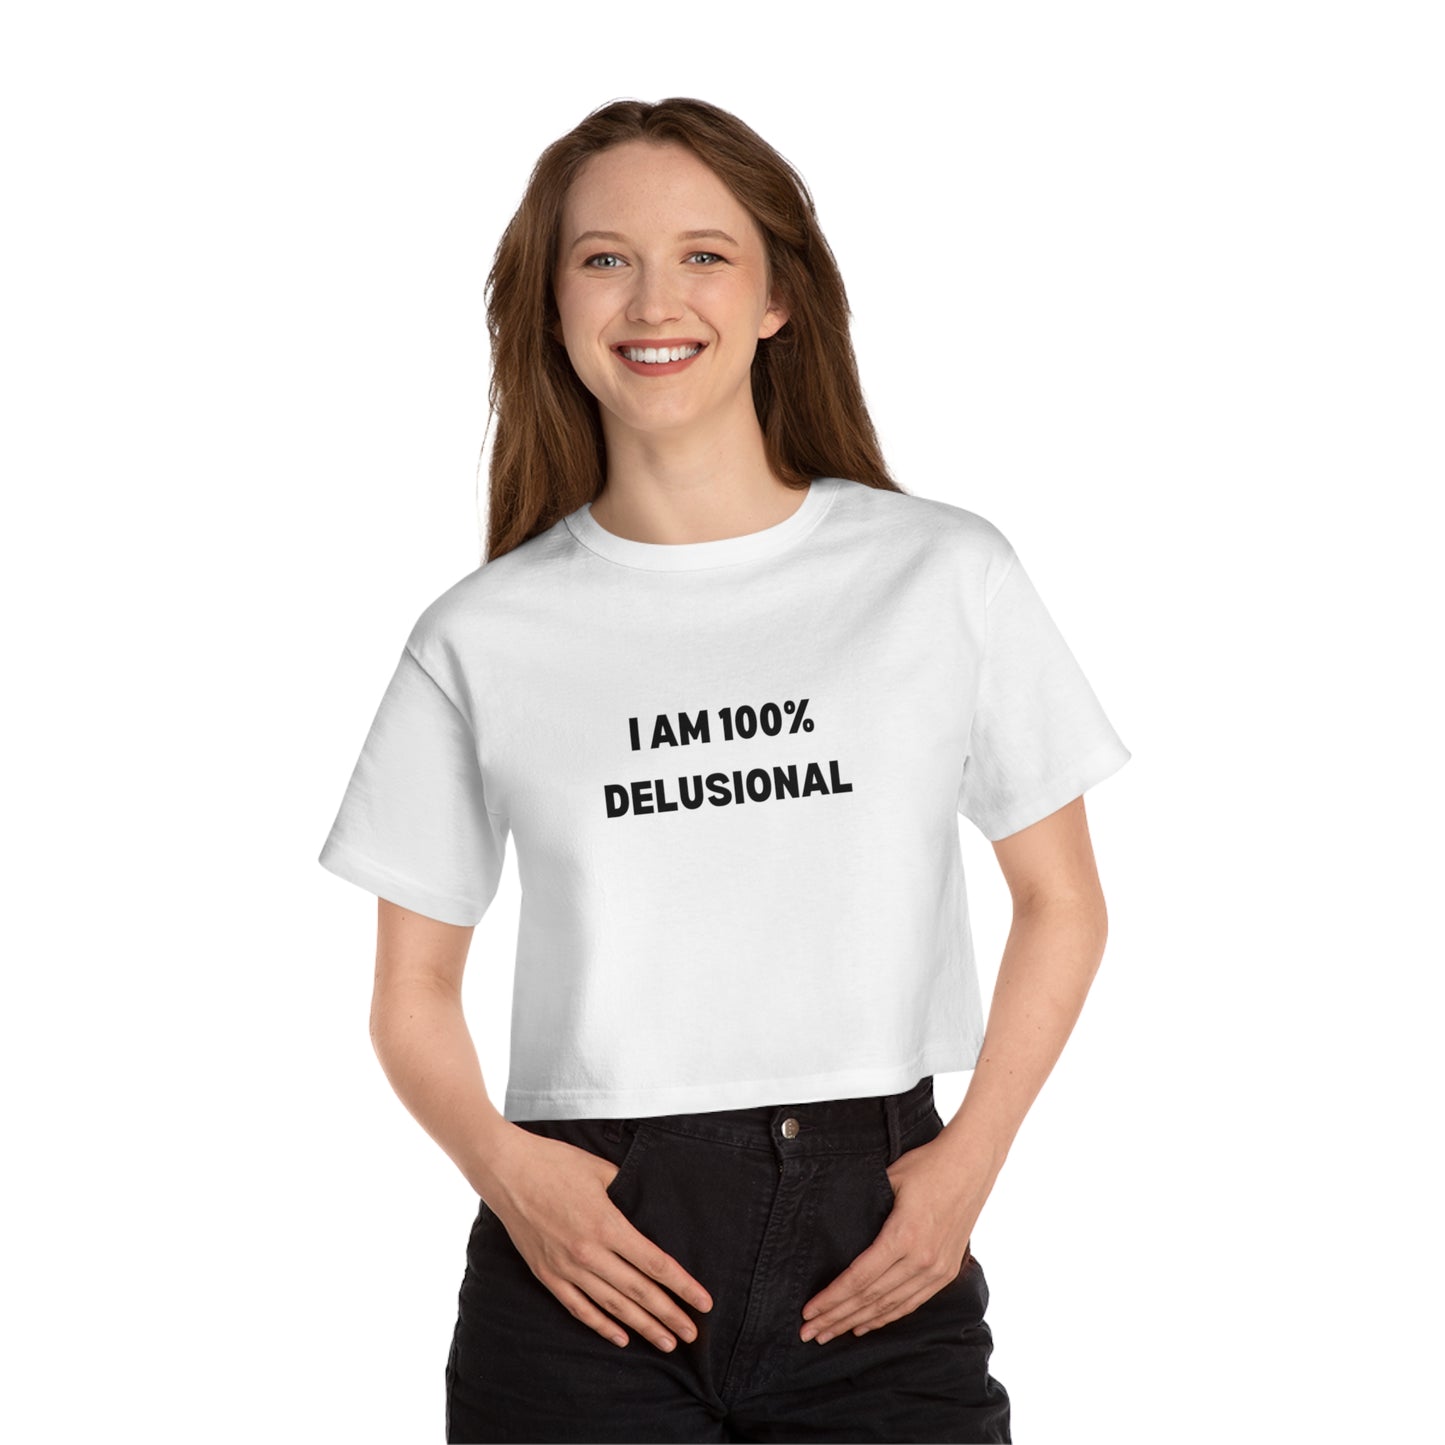 "I am 100% Delusional" - Champion crop top